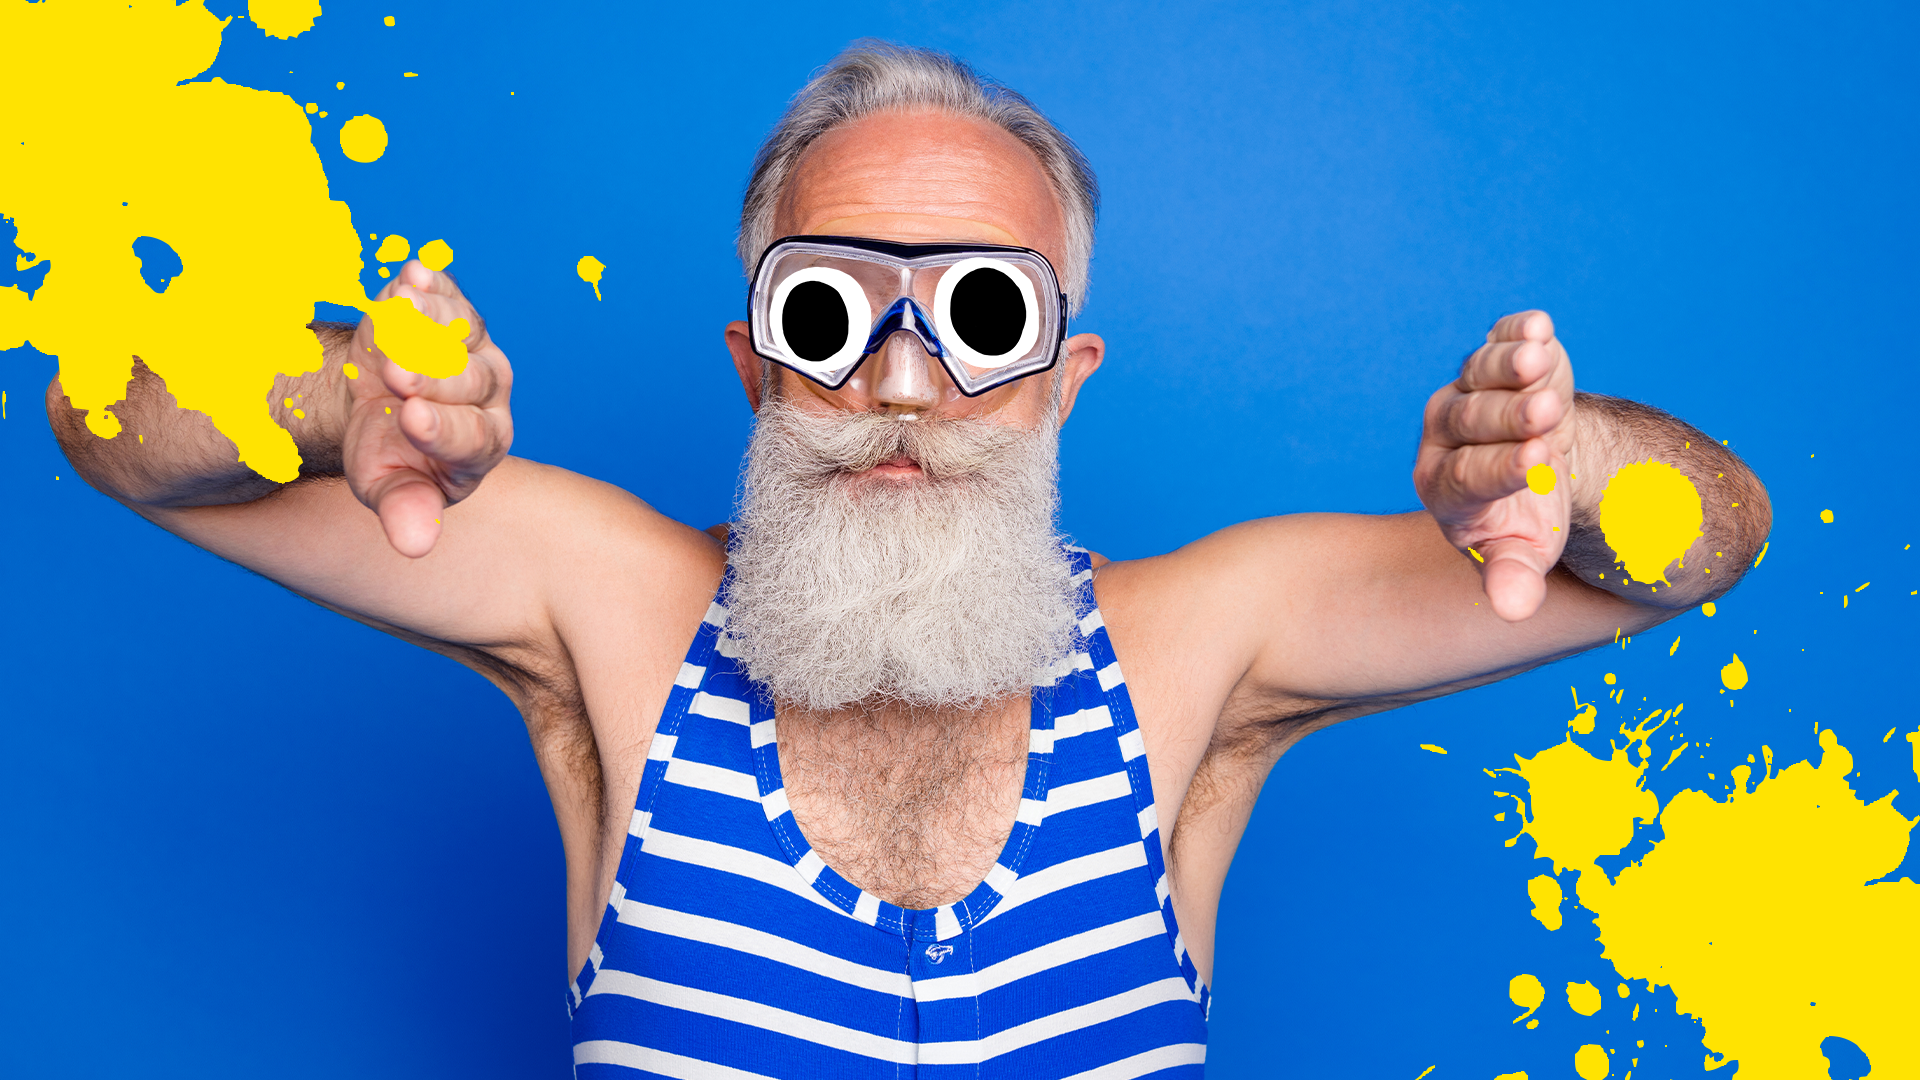 Man in old fashioned swimming costume on blue background with yellow splats